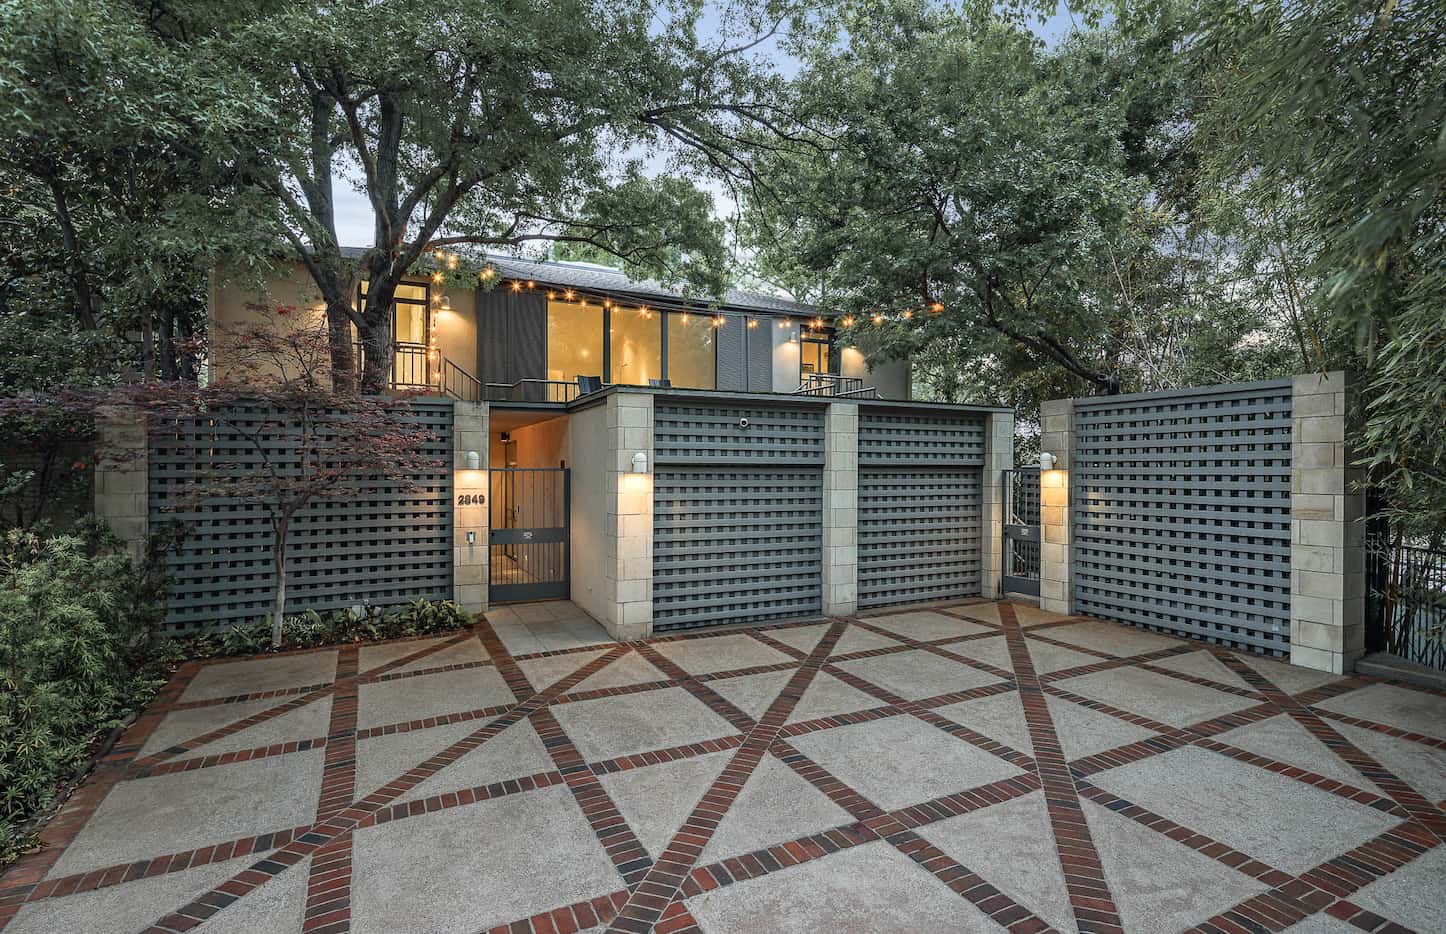 Built in 1988, this home along Turtle Creek was designed by architect Bud Oglesby.